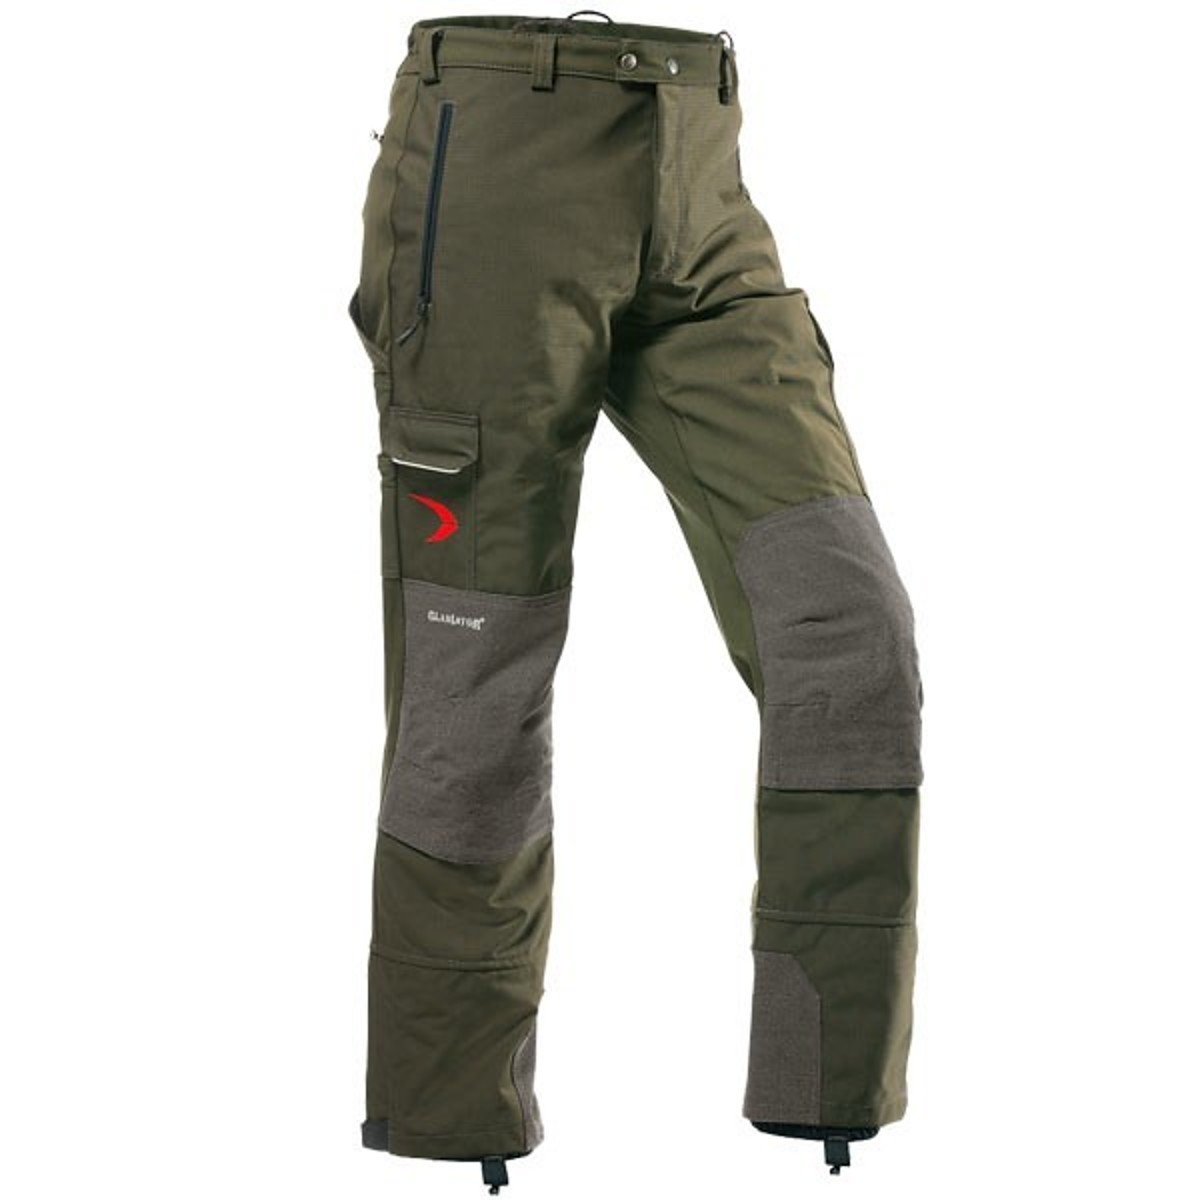 Pfanner Gladiator outdoor trousers